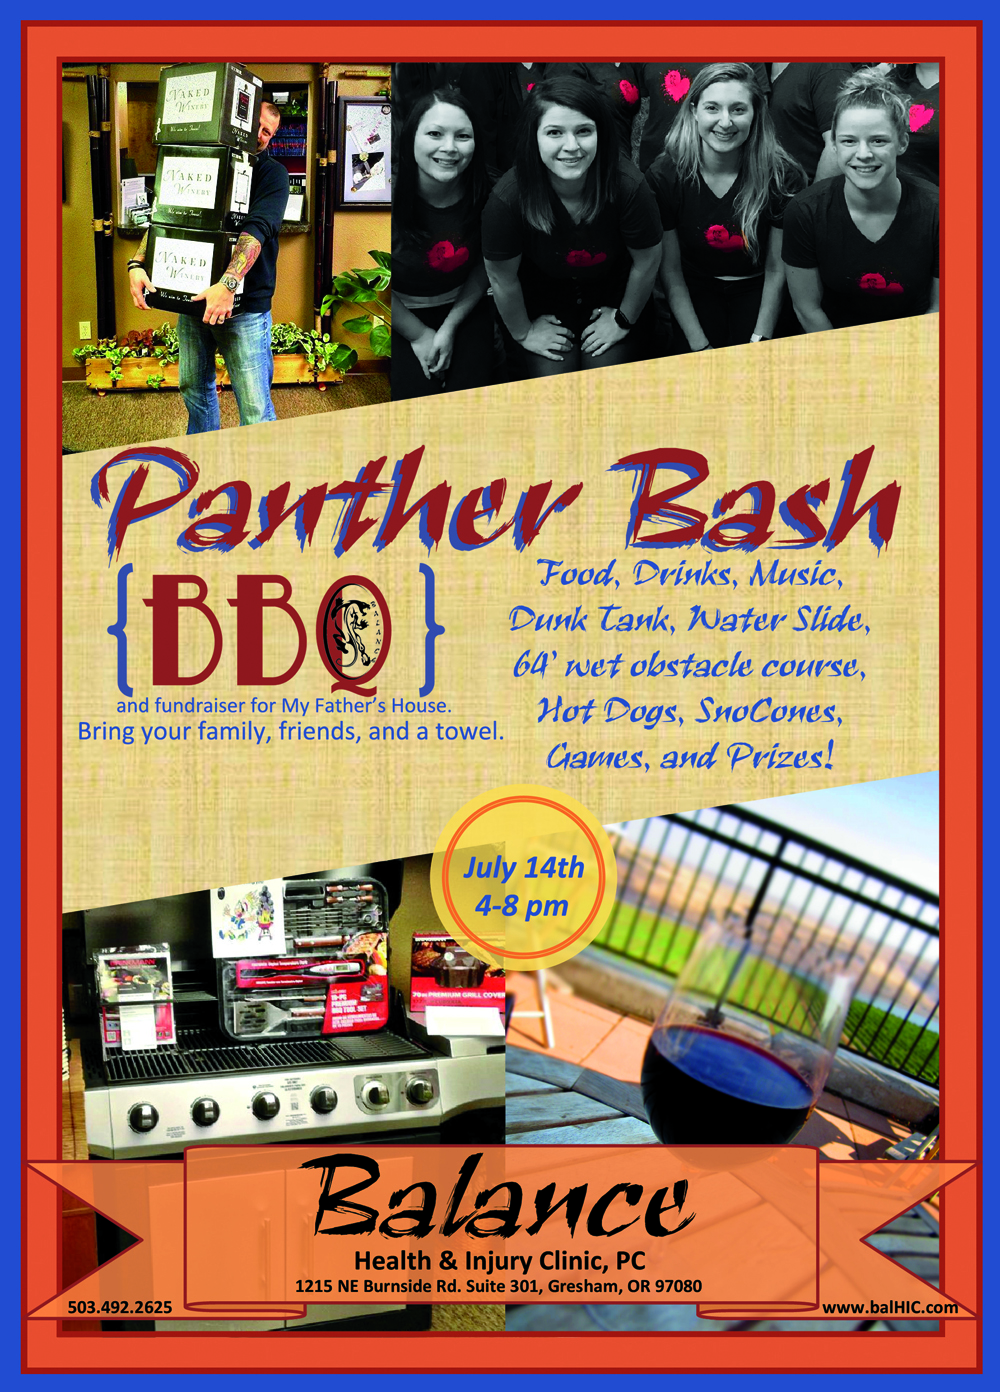 The official Panther Bash post card.